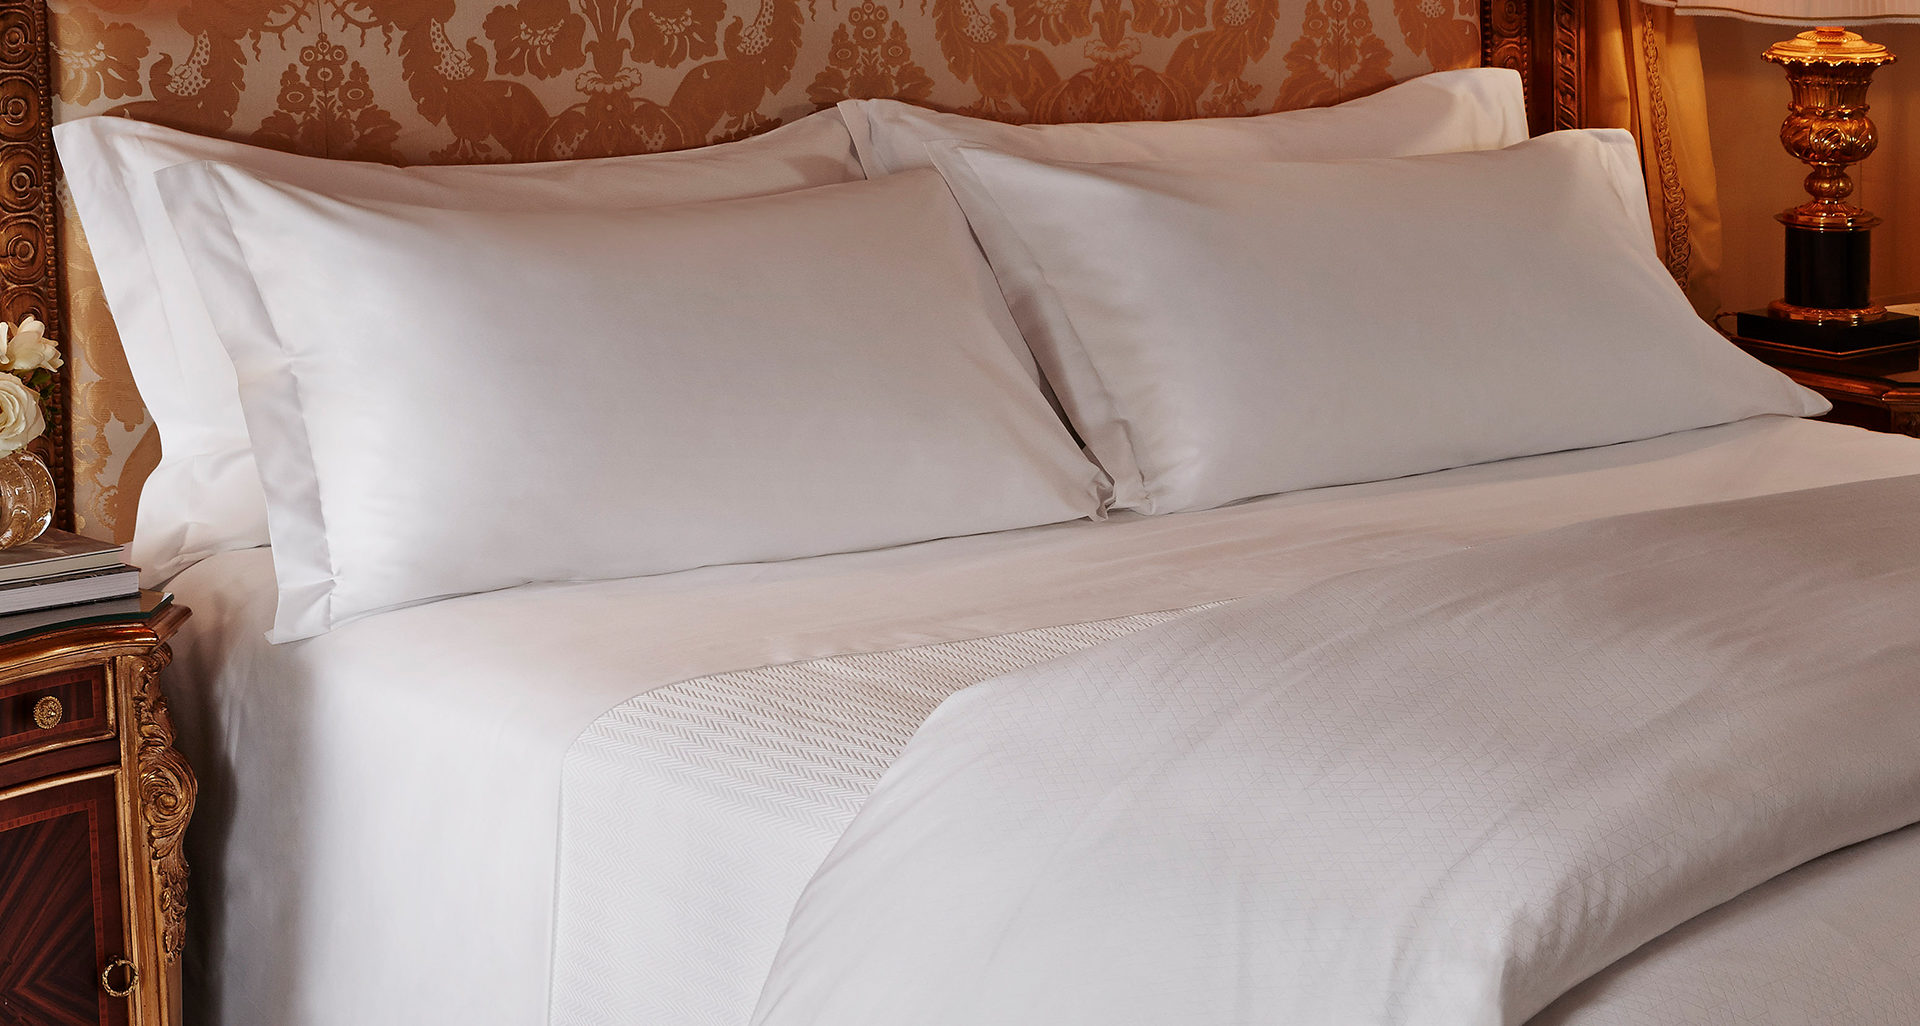 The Luxury Collection Bedding